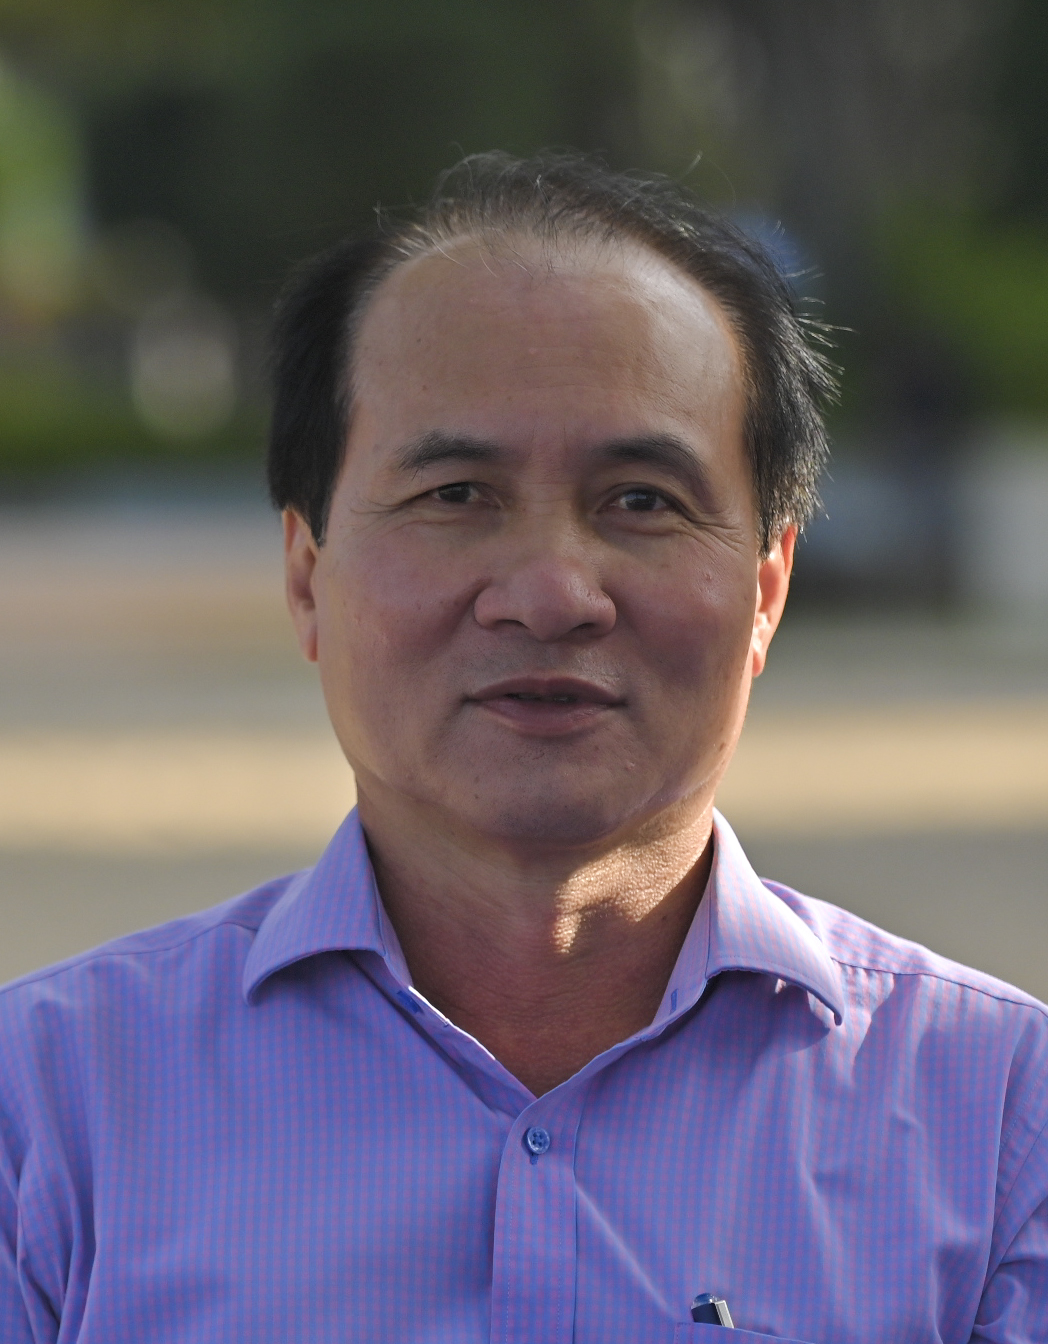 Nguyen Tuan Thanh, Director of Khanh Hoa Provincial Department of Culture and Sports

